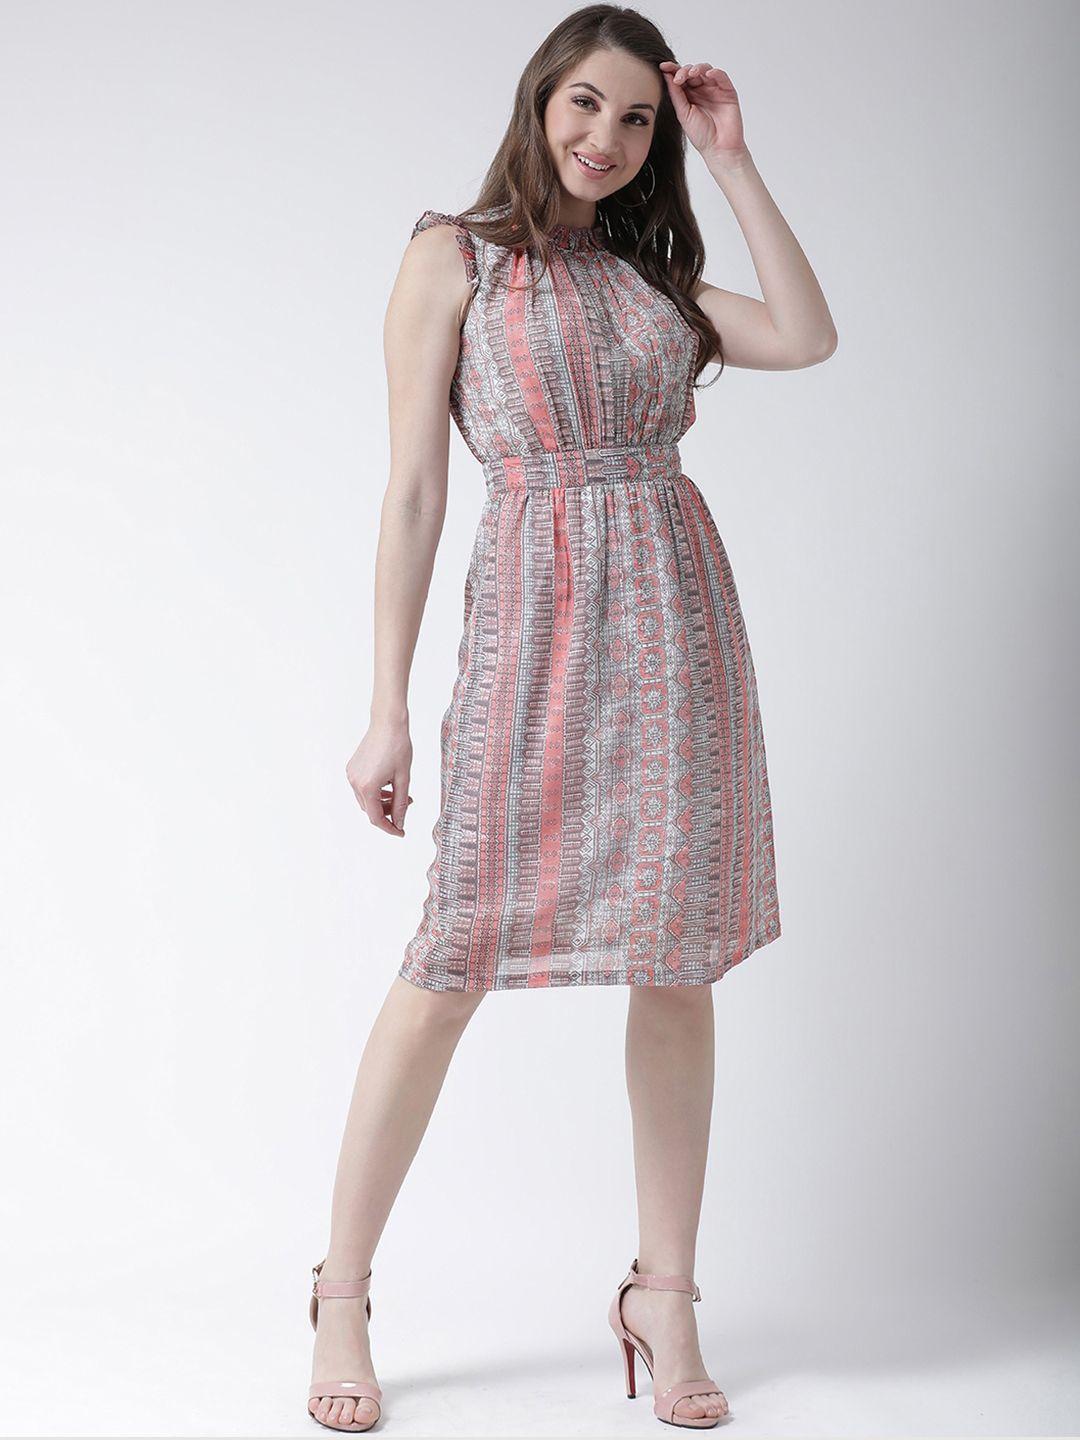 kassually women peach-coloured & grey printed fit and flare dress